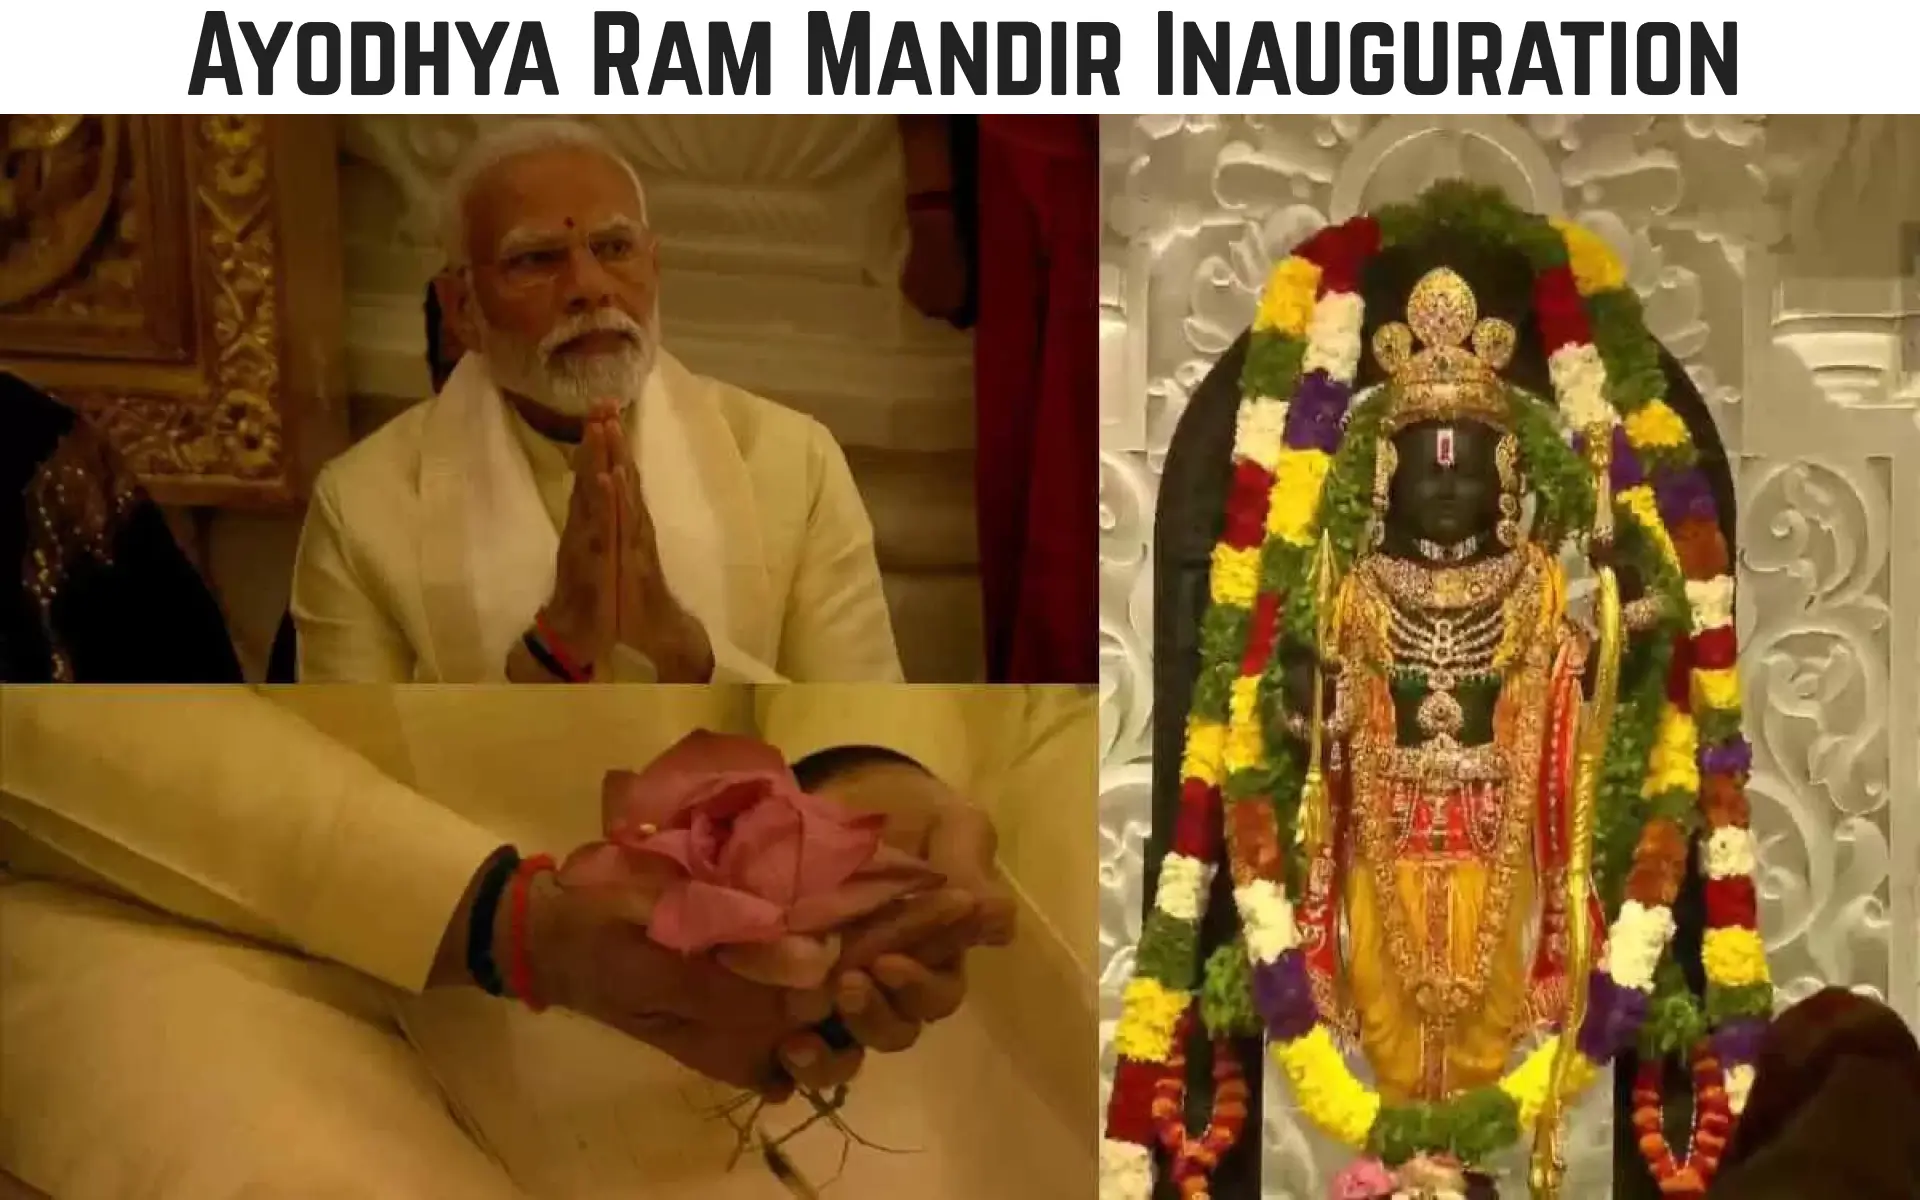 The Ayodhya Ram Mandir: A Historic Moment in Indian History